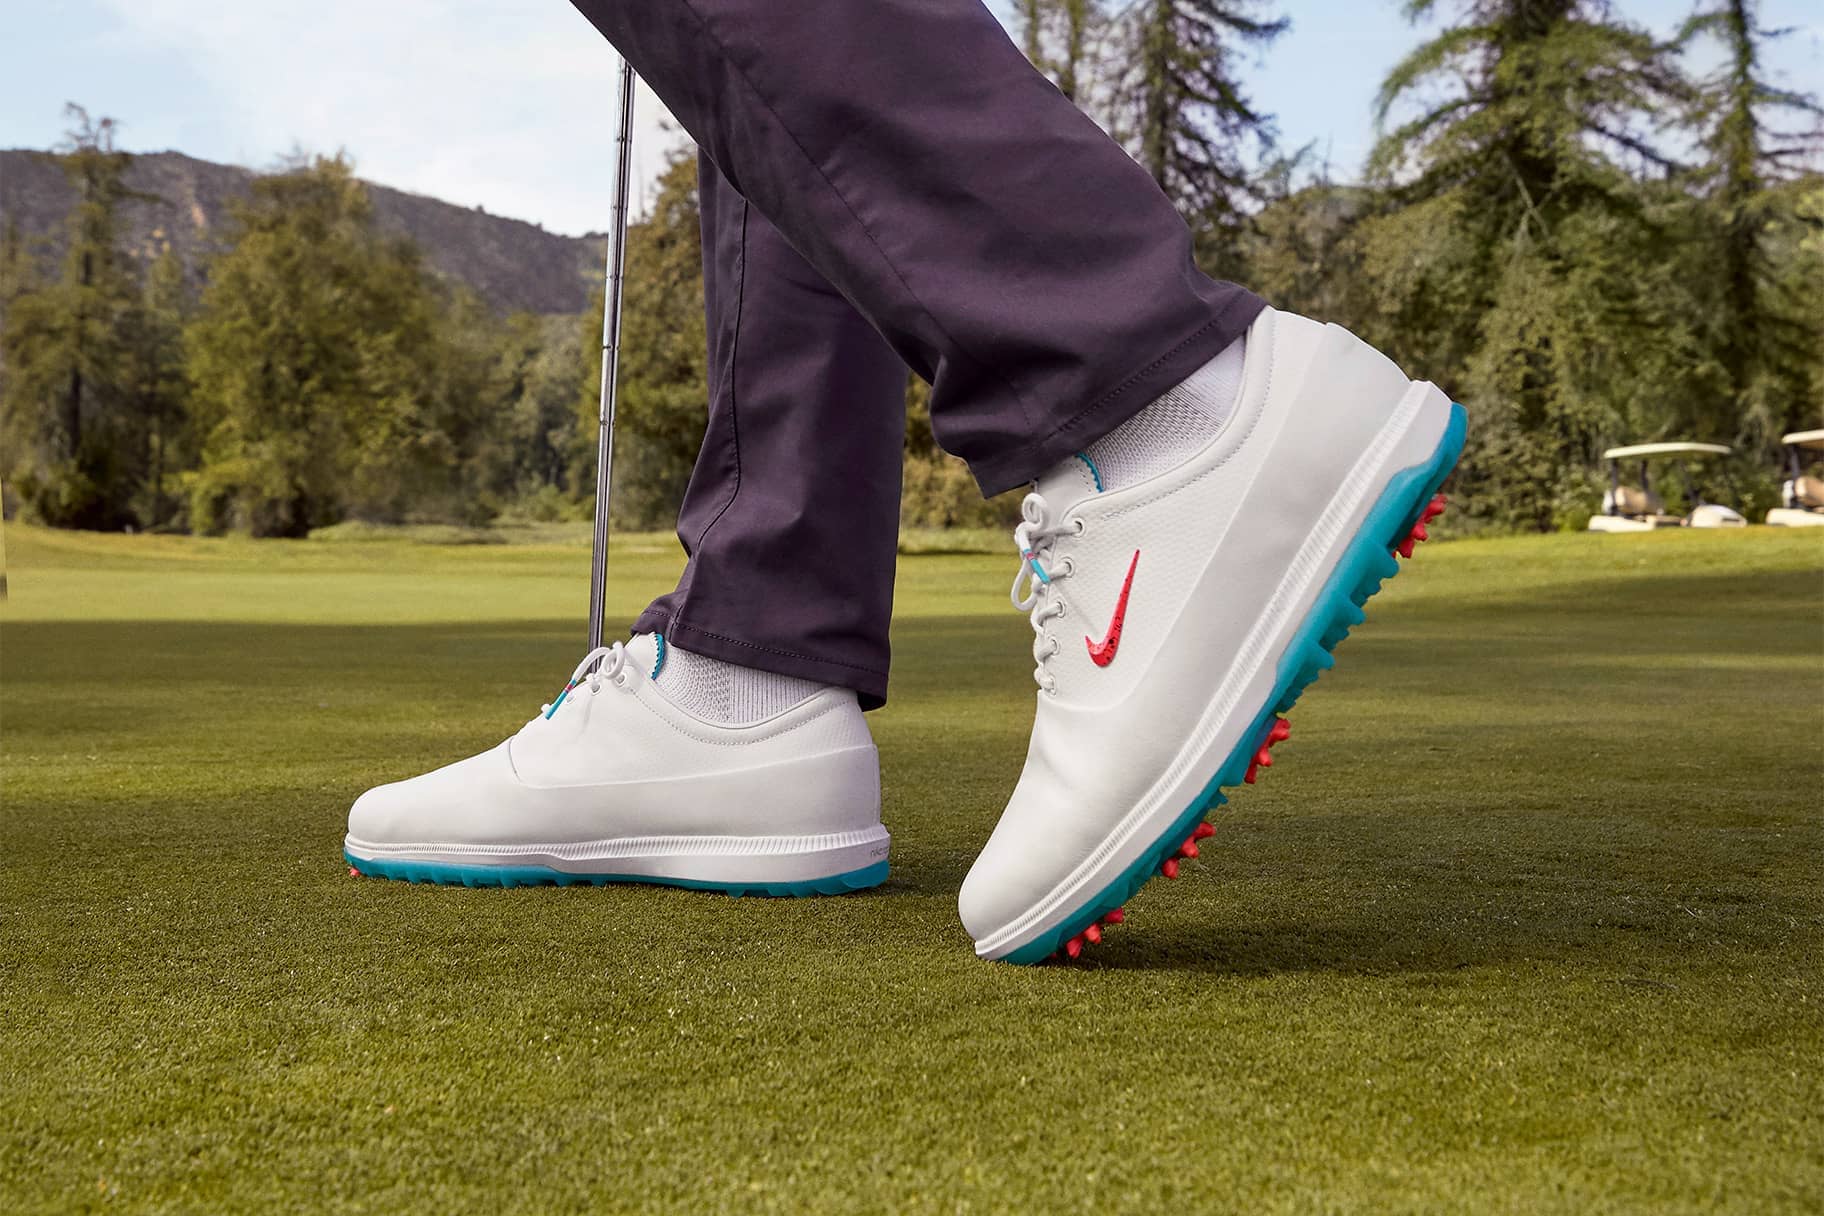 Nike's Best Golf Shoes for Traction, Stability and Comfort. Nike HR